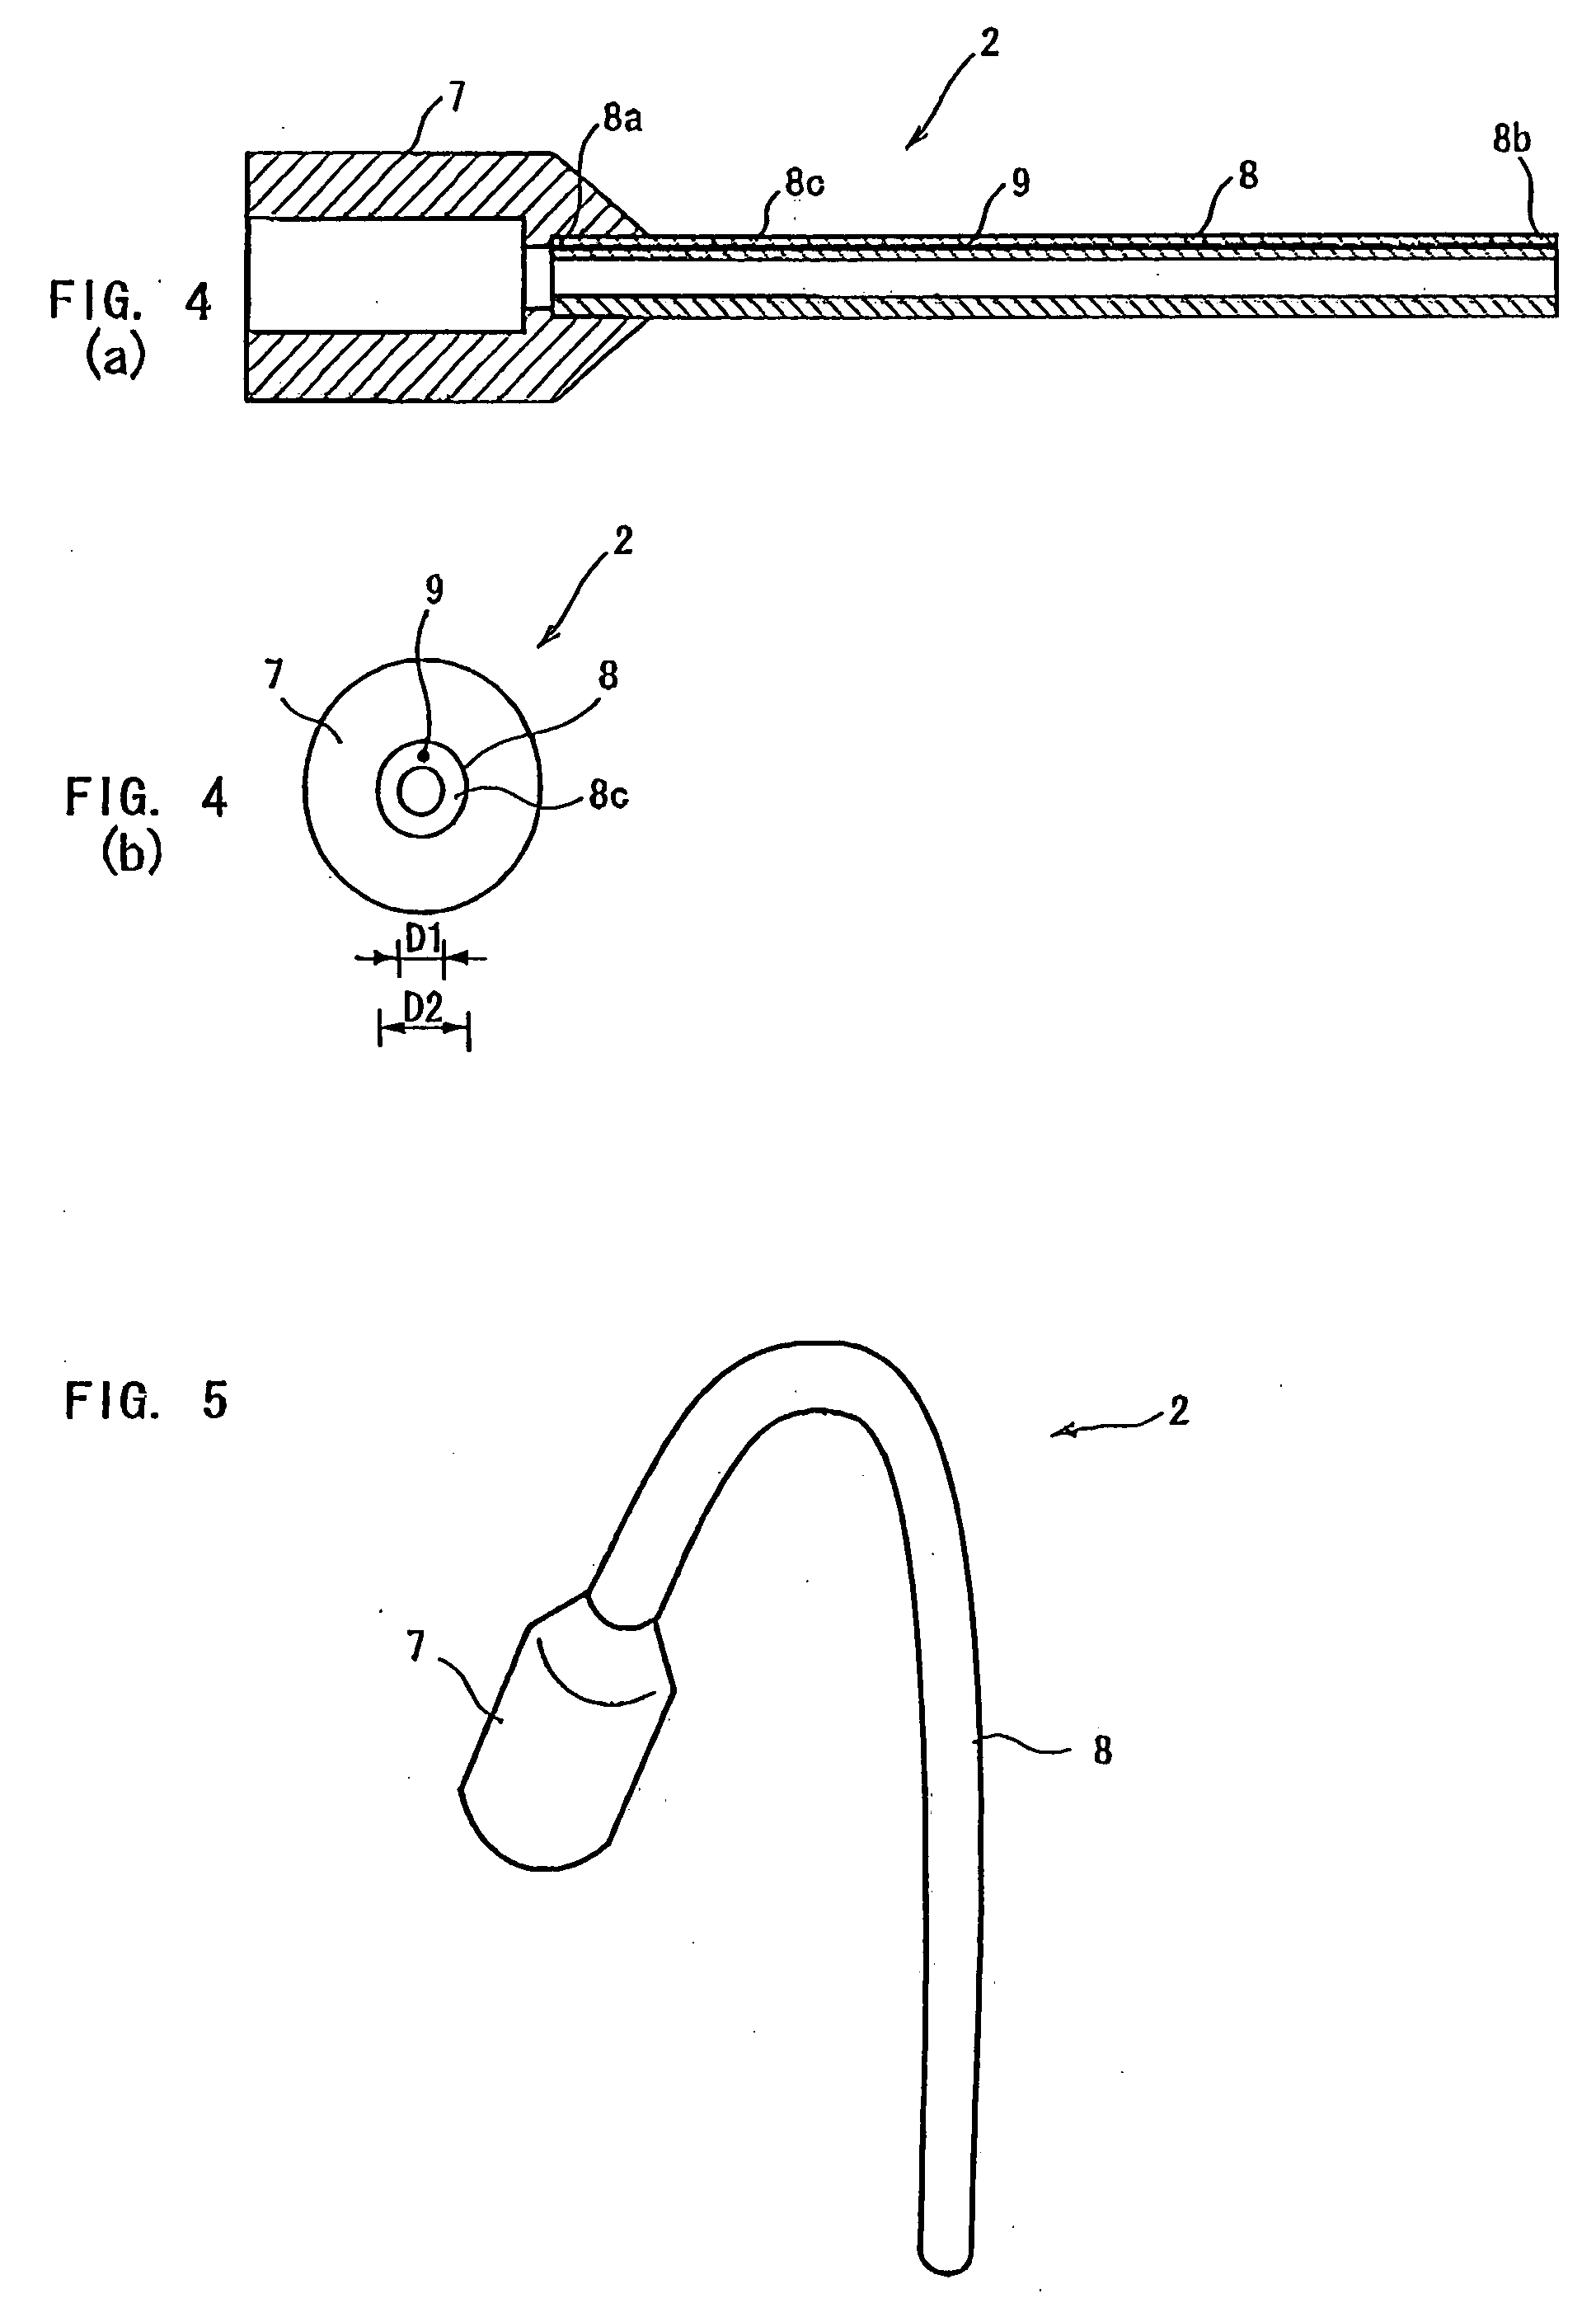 Behind-the-ear type hearing aid